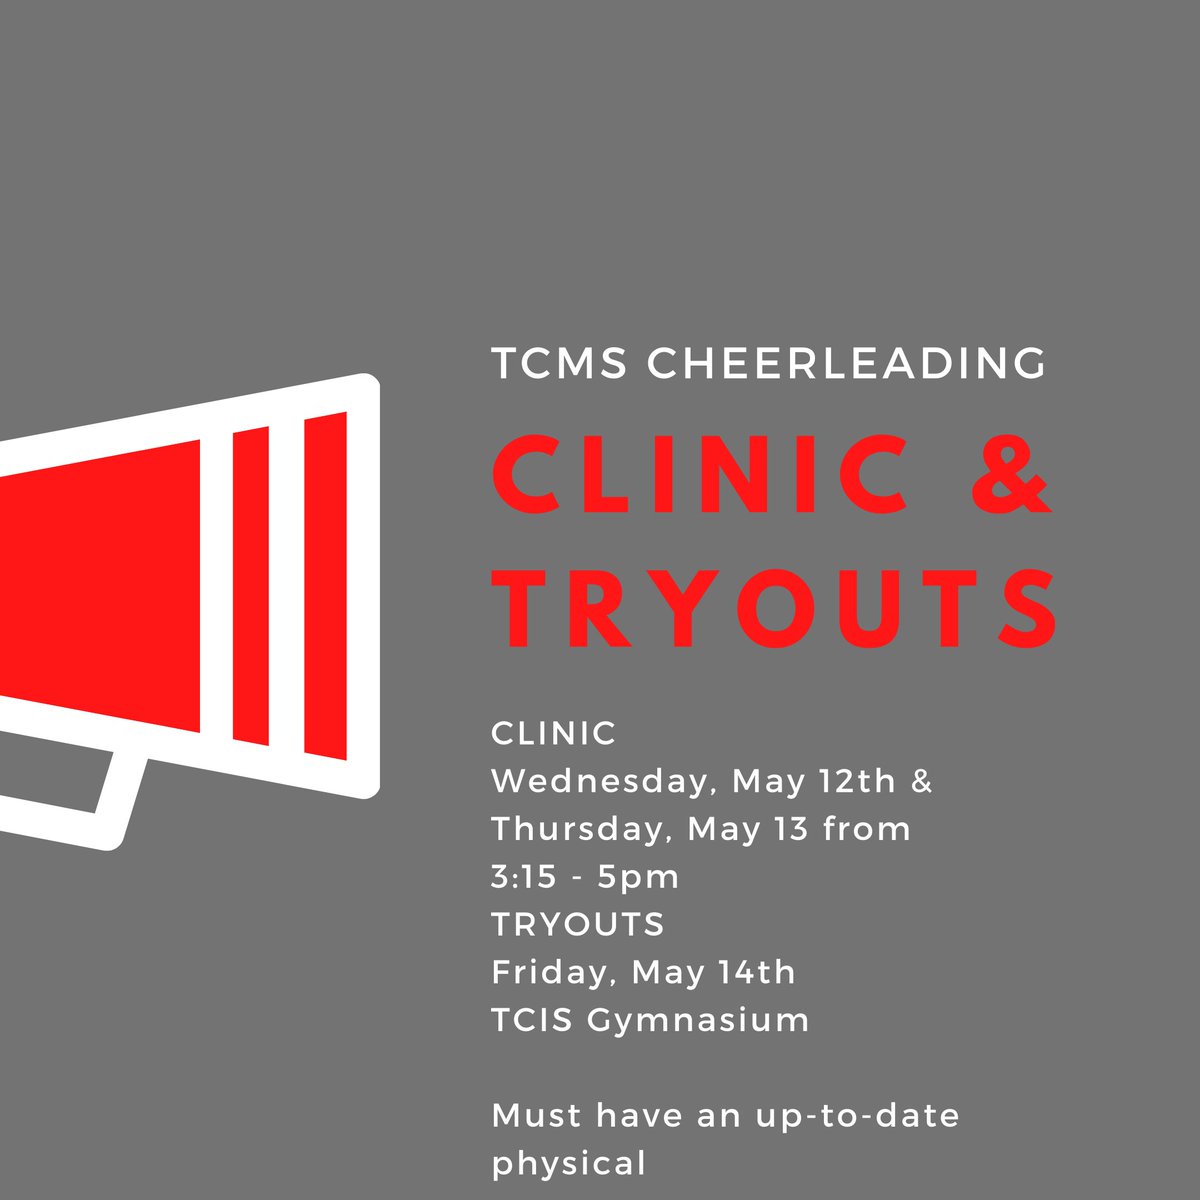 REMINDER: TCMS Cheerleading clinic and tryouts are this week!! 

Please call or text Coach Jenny Miller at 270-403-5817 or Coach Dana Rogers at 270-469-5872 with any questions and to get signed up to tryout!

#tcpride #gocards #tcmscheerleading https://t.co/Qj61IRXreI